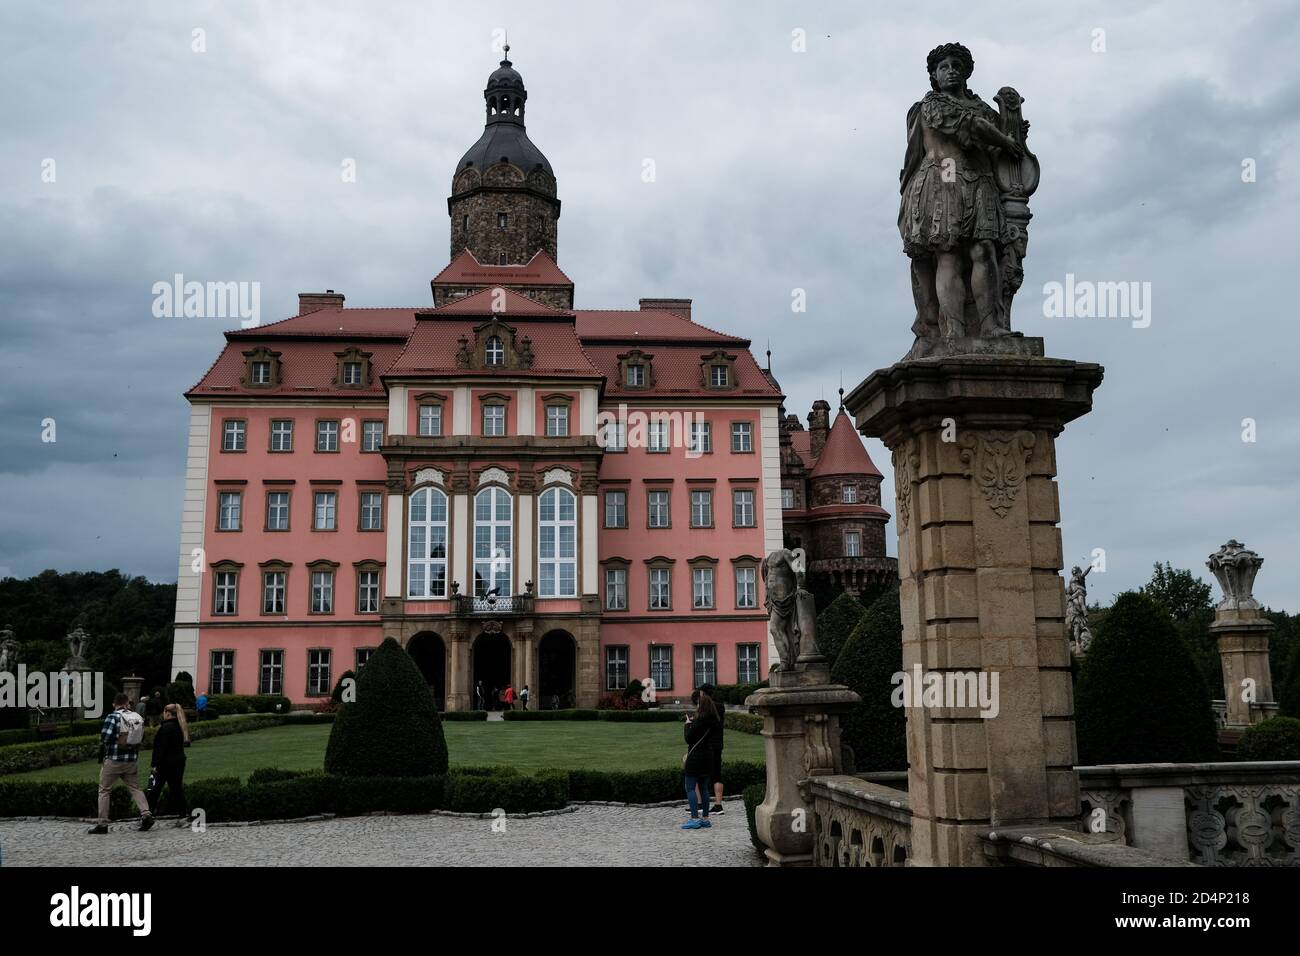 Walbrzych, Poland - 18 July 2020: Ksiaz Castle, the largest castle in the Silesia region. Castle Museum Stock Photo